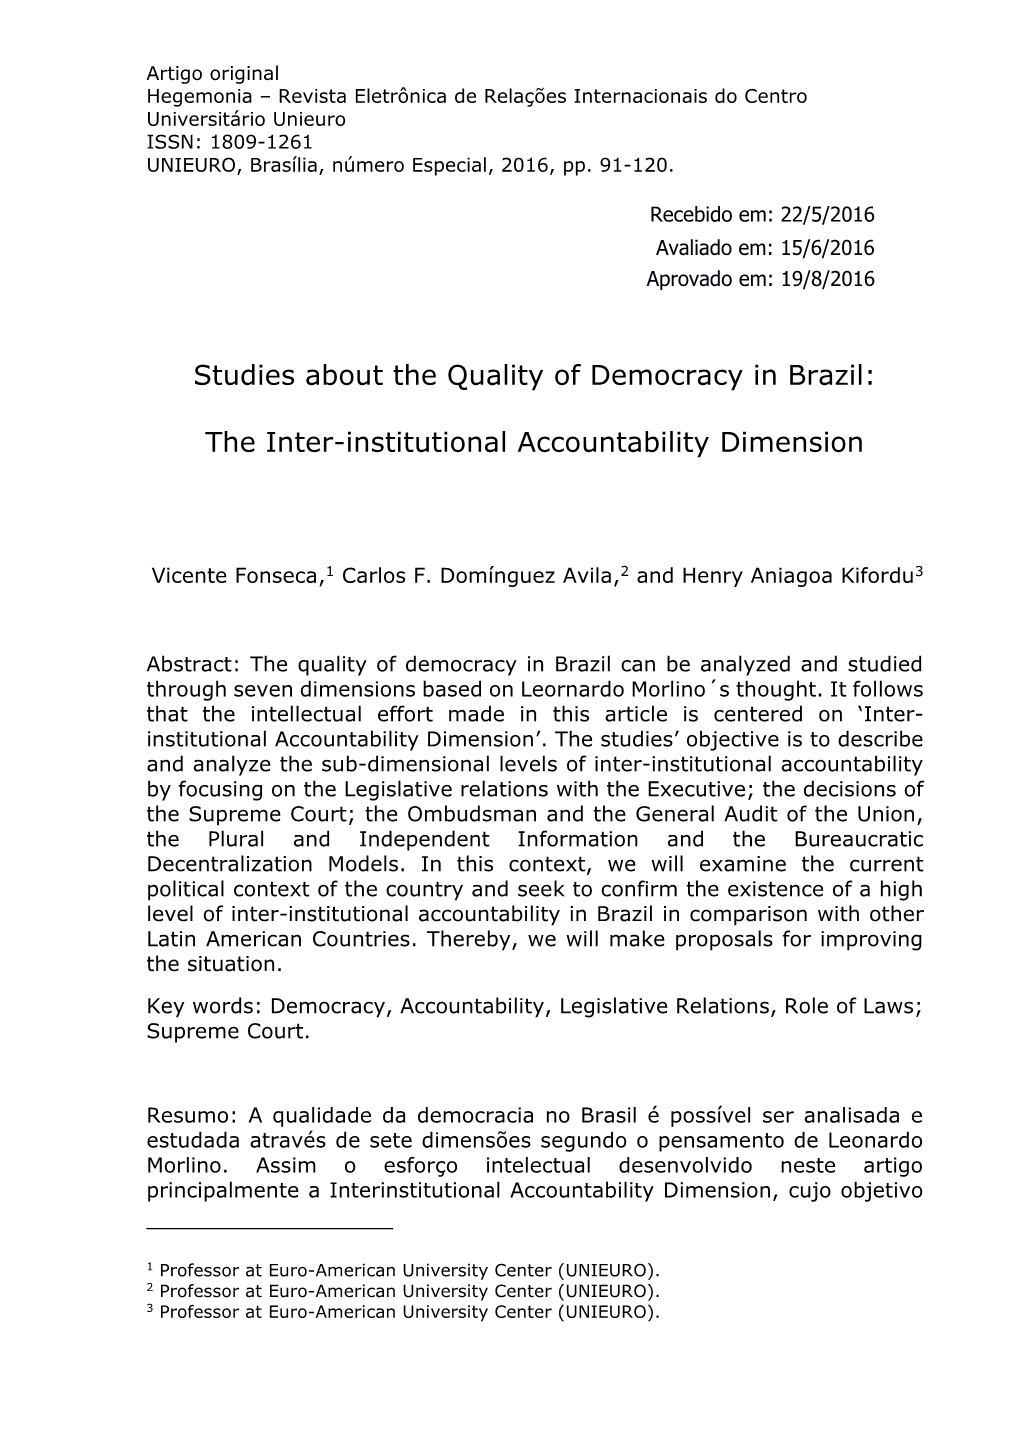 Studies About the Quality of Democracy in Brazil: the Inter-Institutional Accountability Dimension